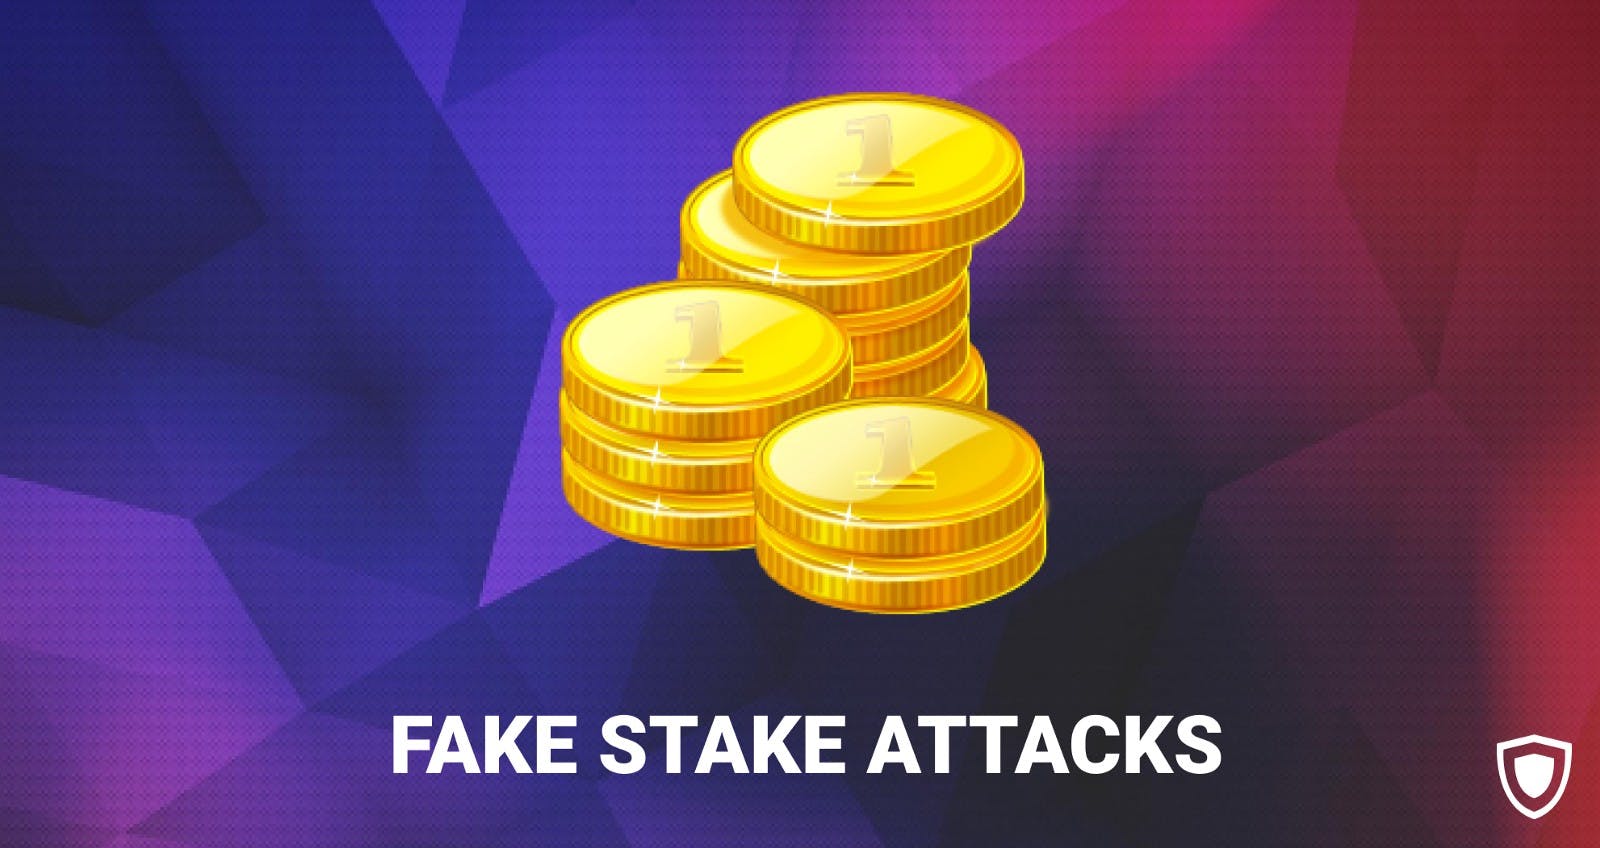 featured image - Should we be afraid of Fake Stake attacks?